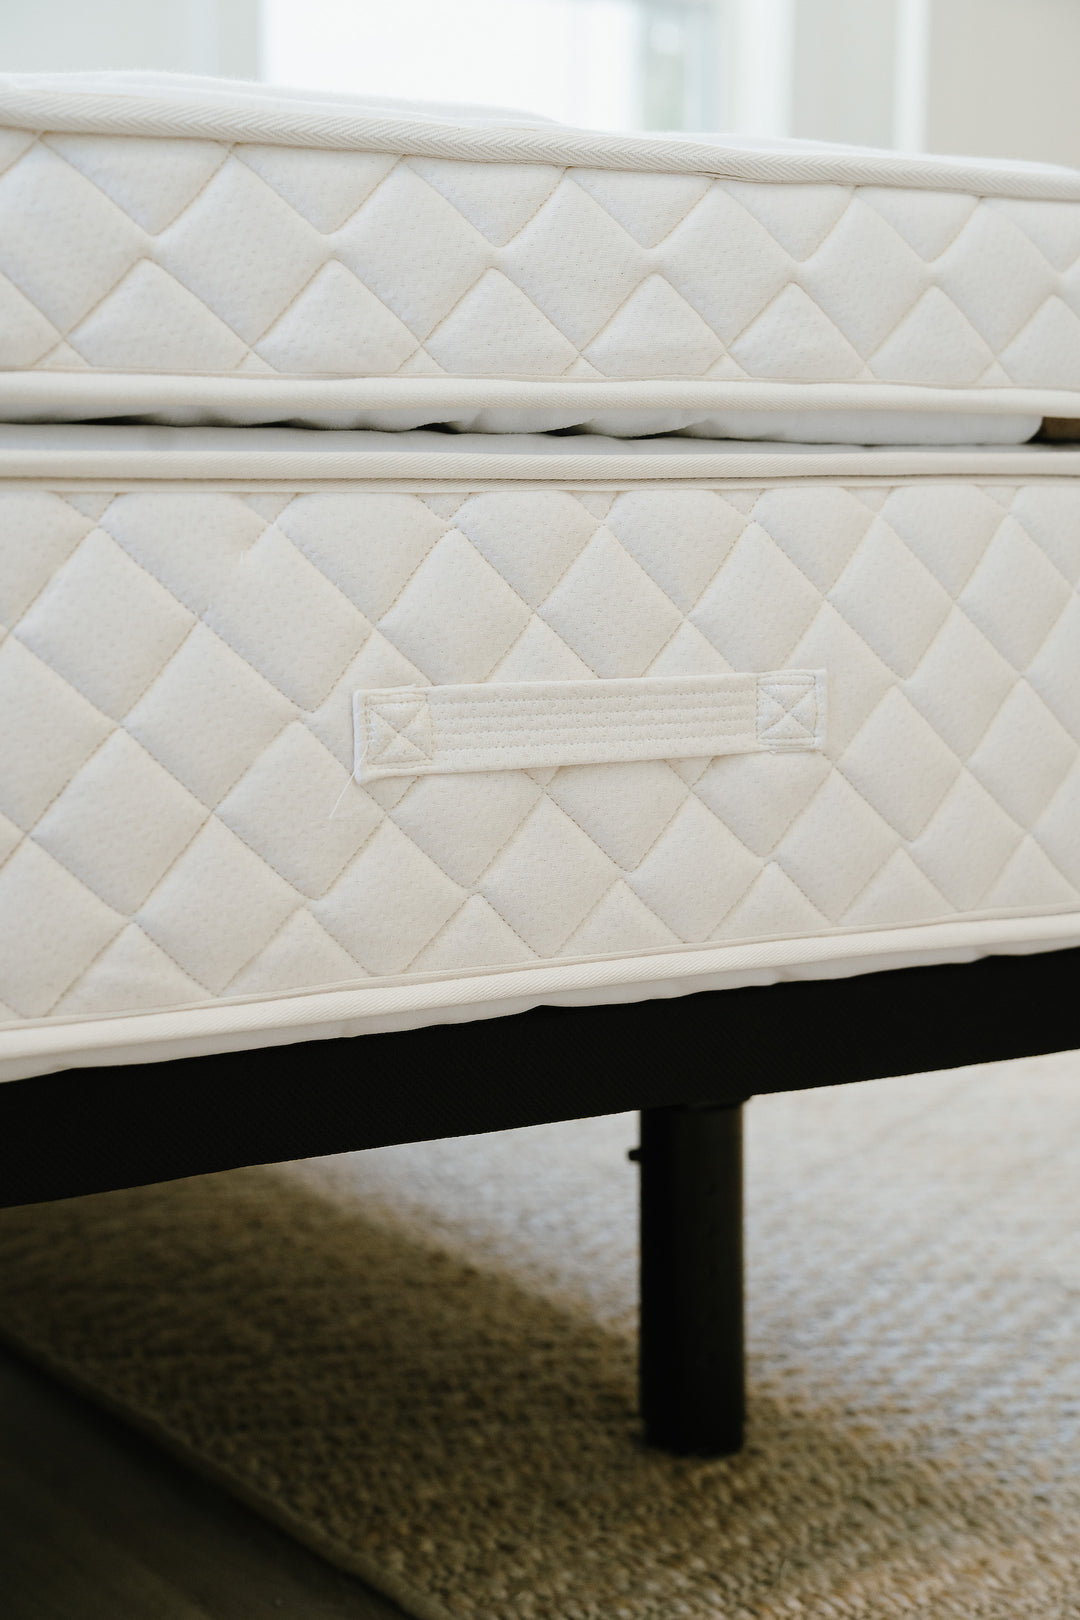 an image of our mattress handles. These tufted handles are very strong for flipping and turning your mattress.